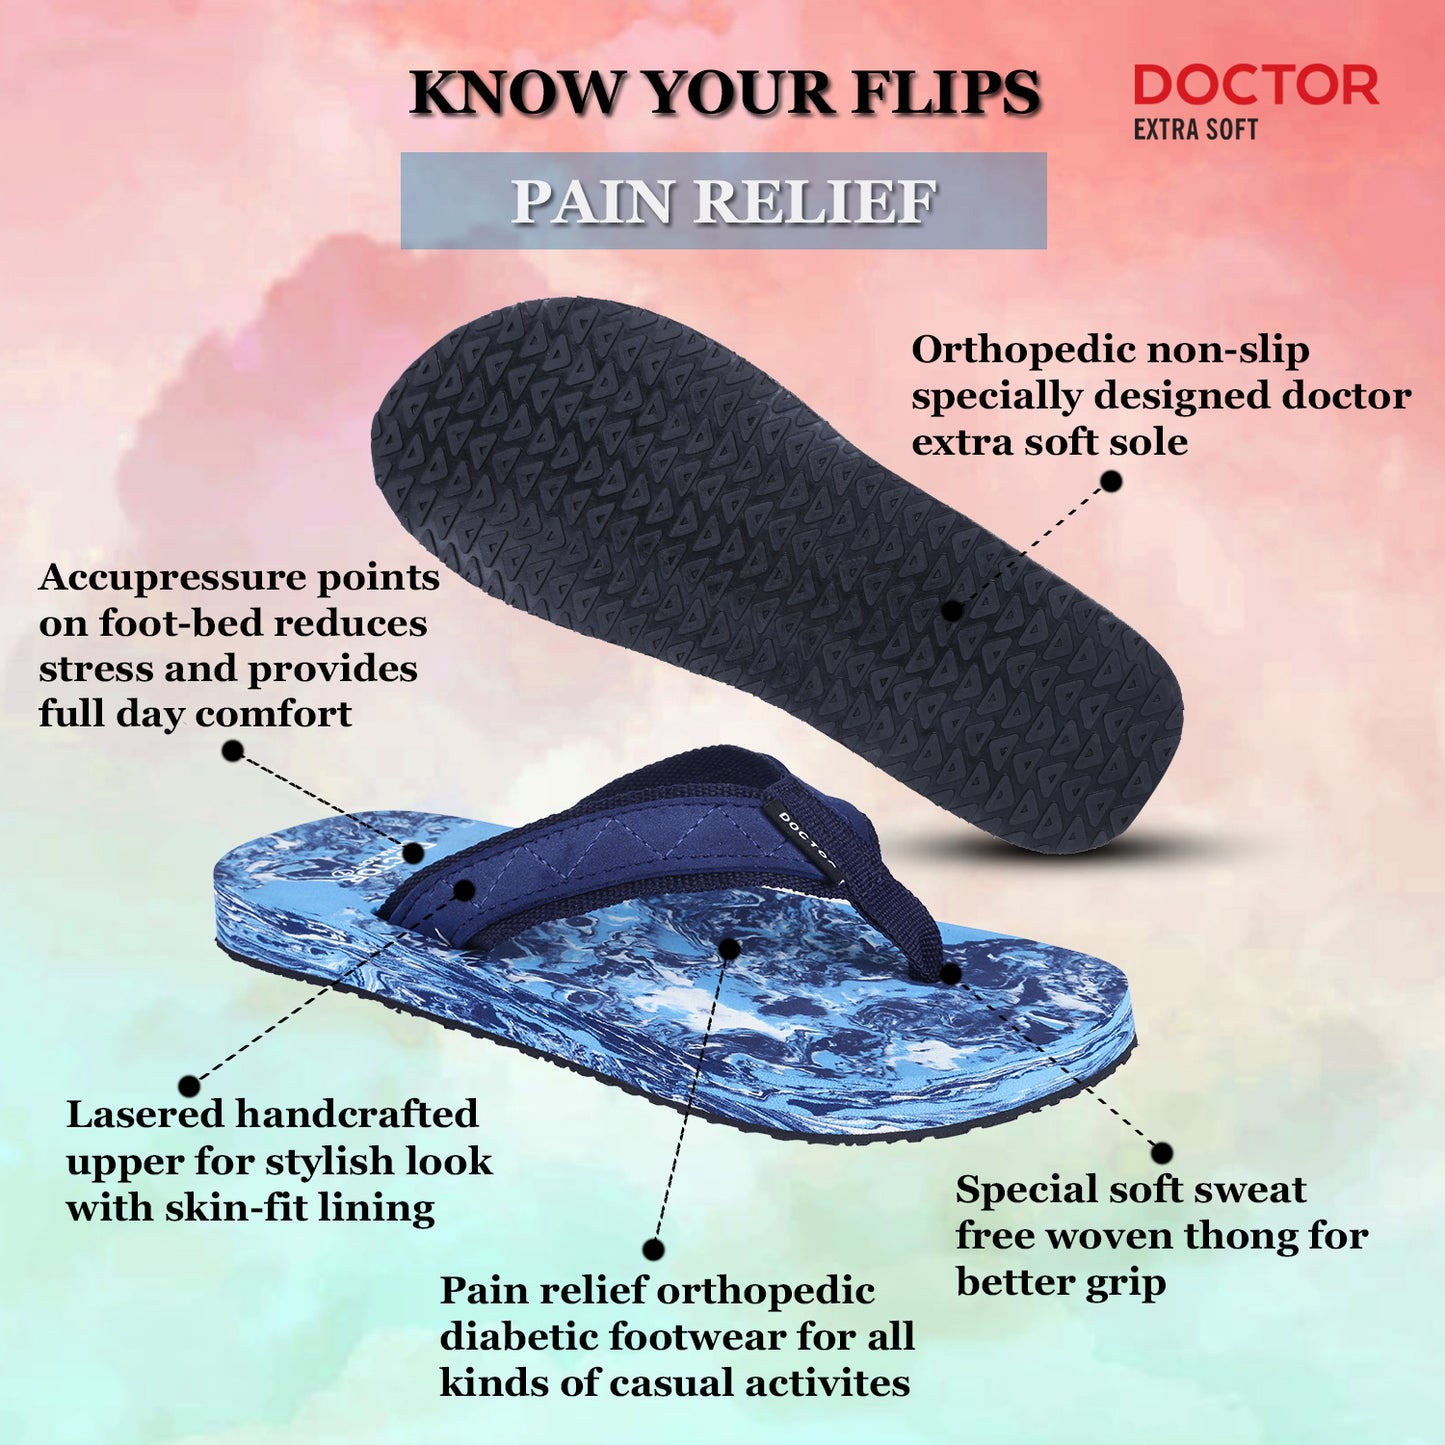 Doctor Extra Soft D-29 Men's Wood Anti Skid Flip flop/ Rubber Slippers, Colorful & Attractive House Sliders